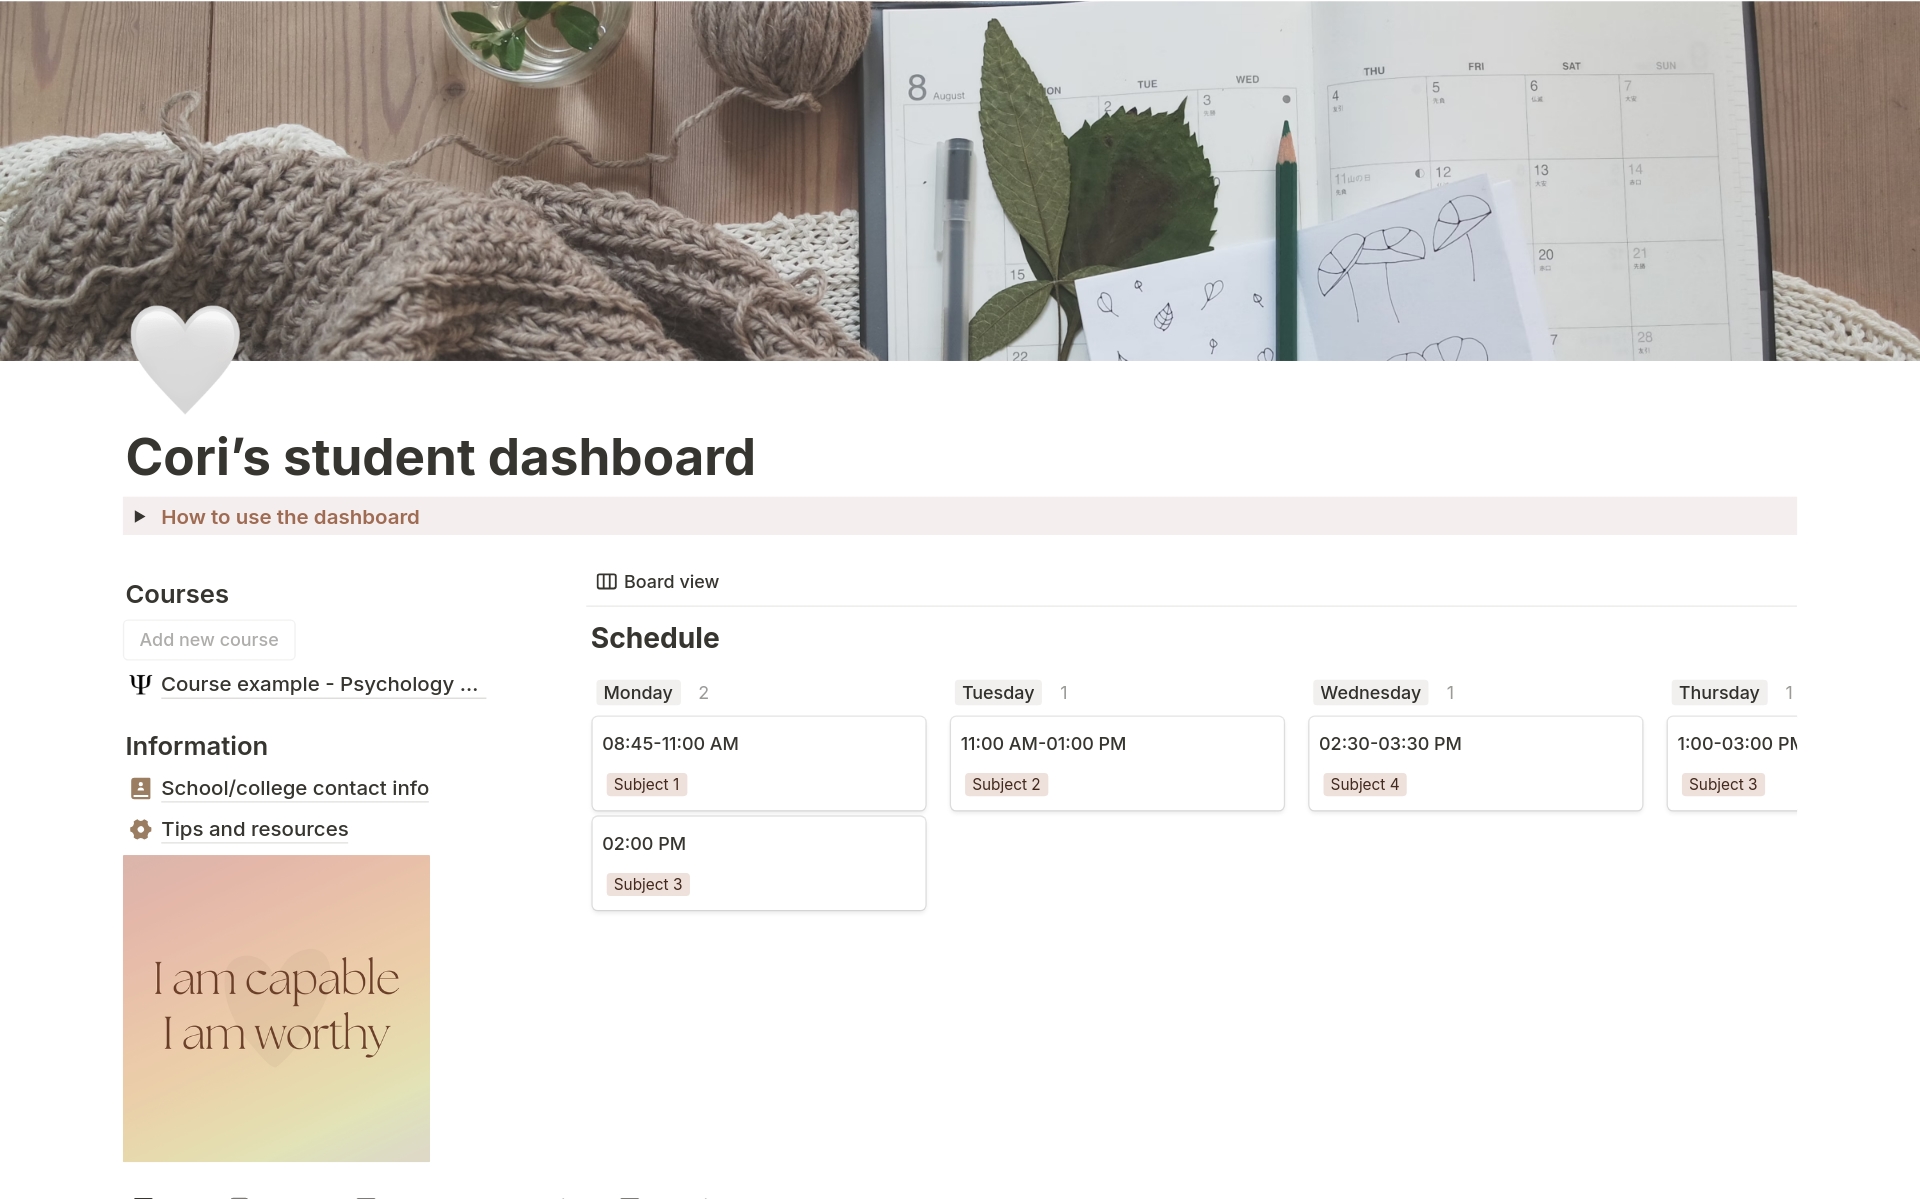 A complete but simple and easy dashboard to organize your student life!